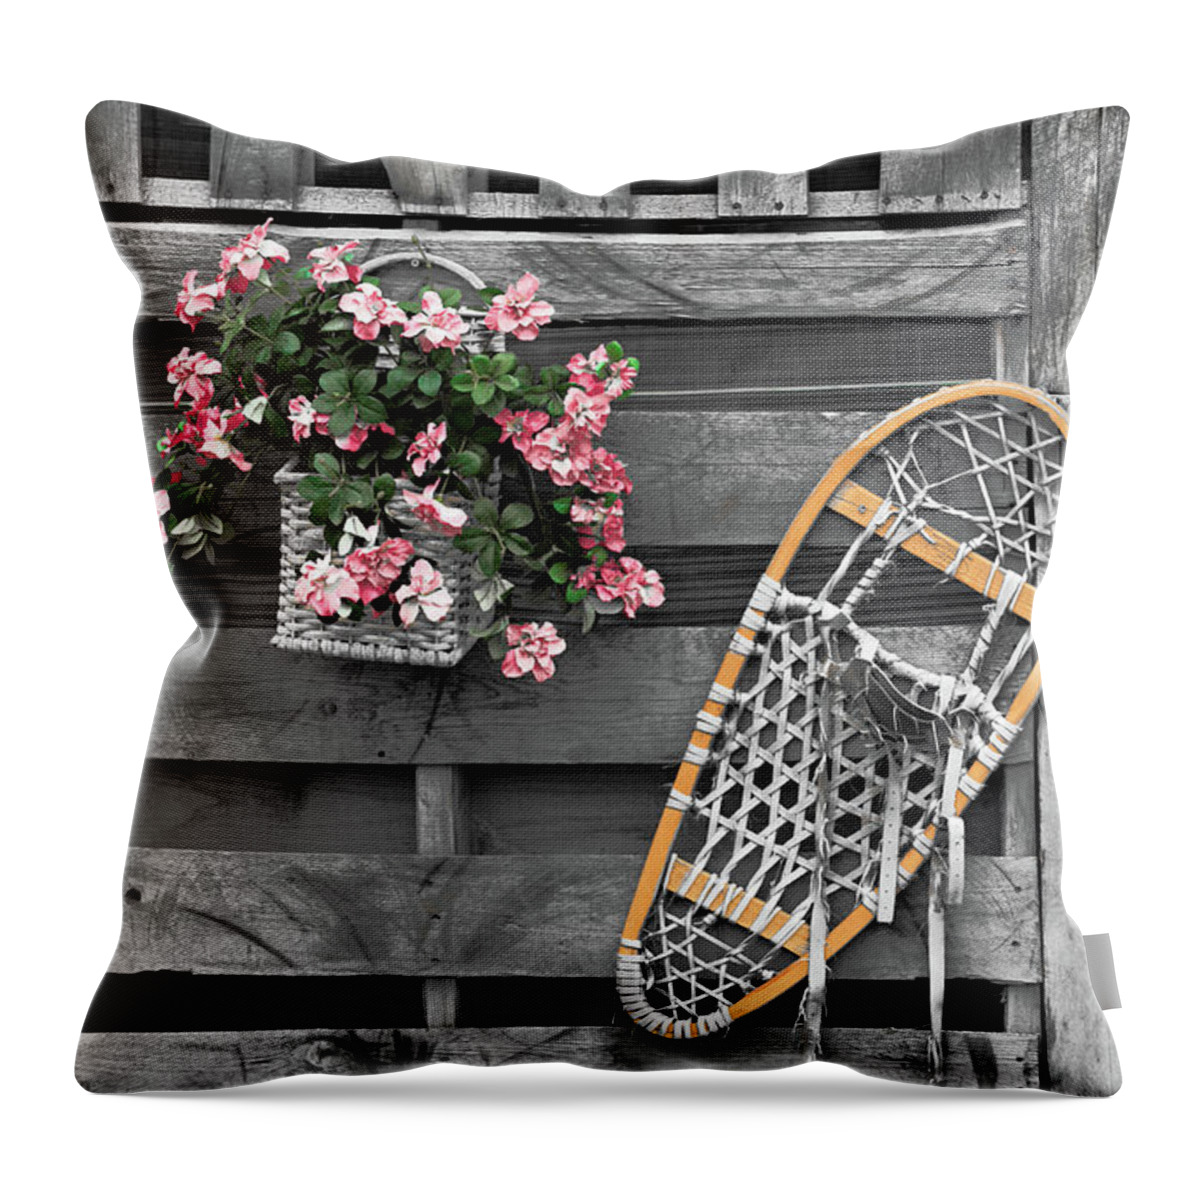 Snowshoe Throw Pillow featuring the photograph Flowers and Snowshoe by Peter J Sucy